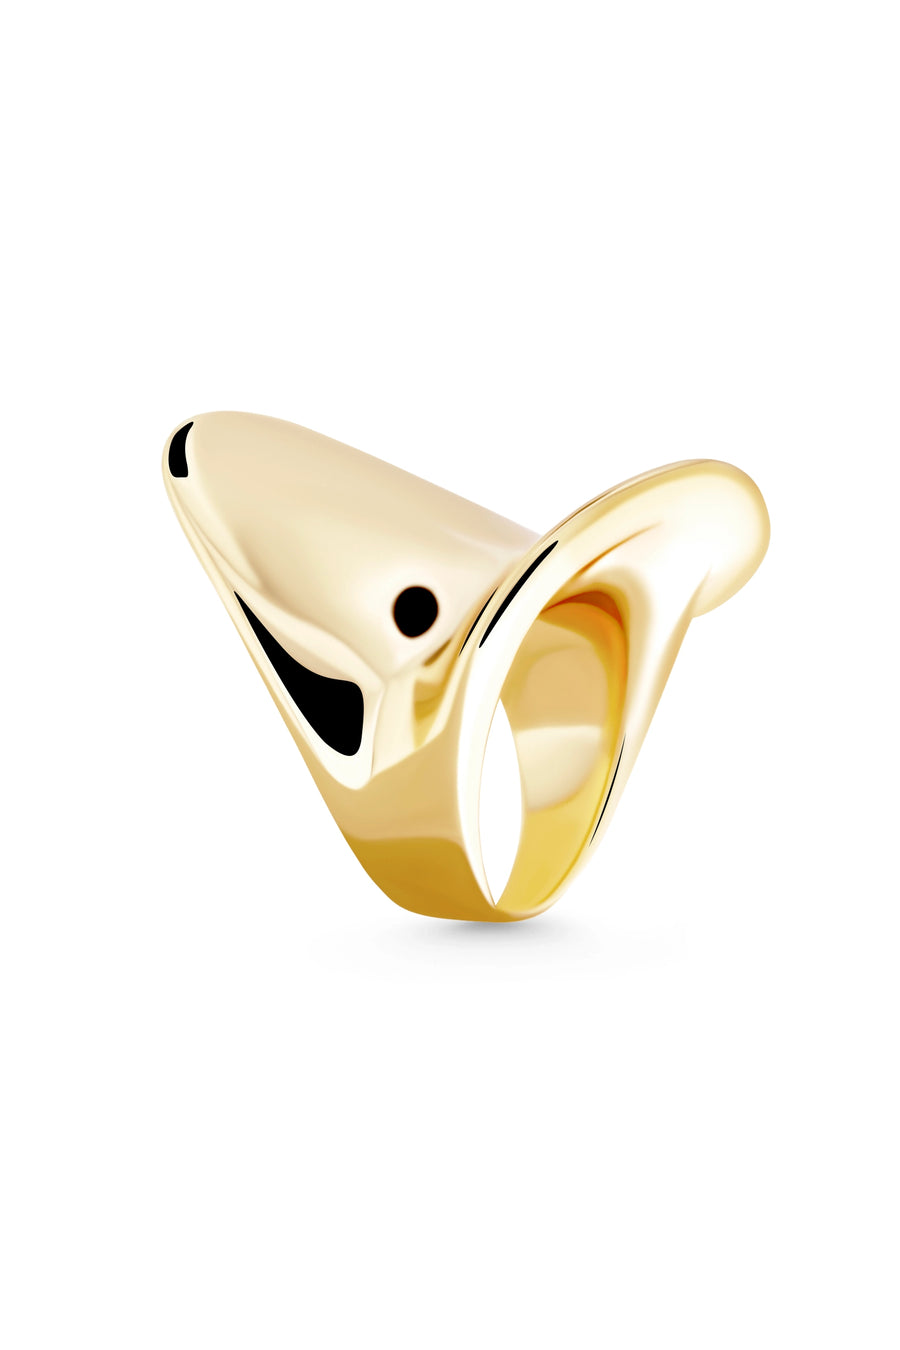 NEFERTITI Ring. Ring topped broad curved plate in high gloss finish, size US7, 18K gold vermeil, handmade, hypoallergenic, water-resistant